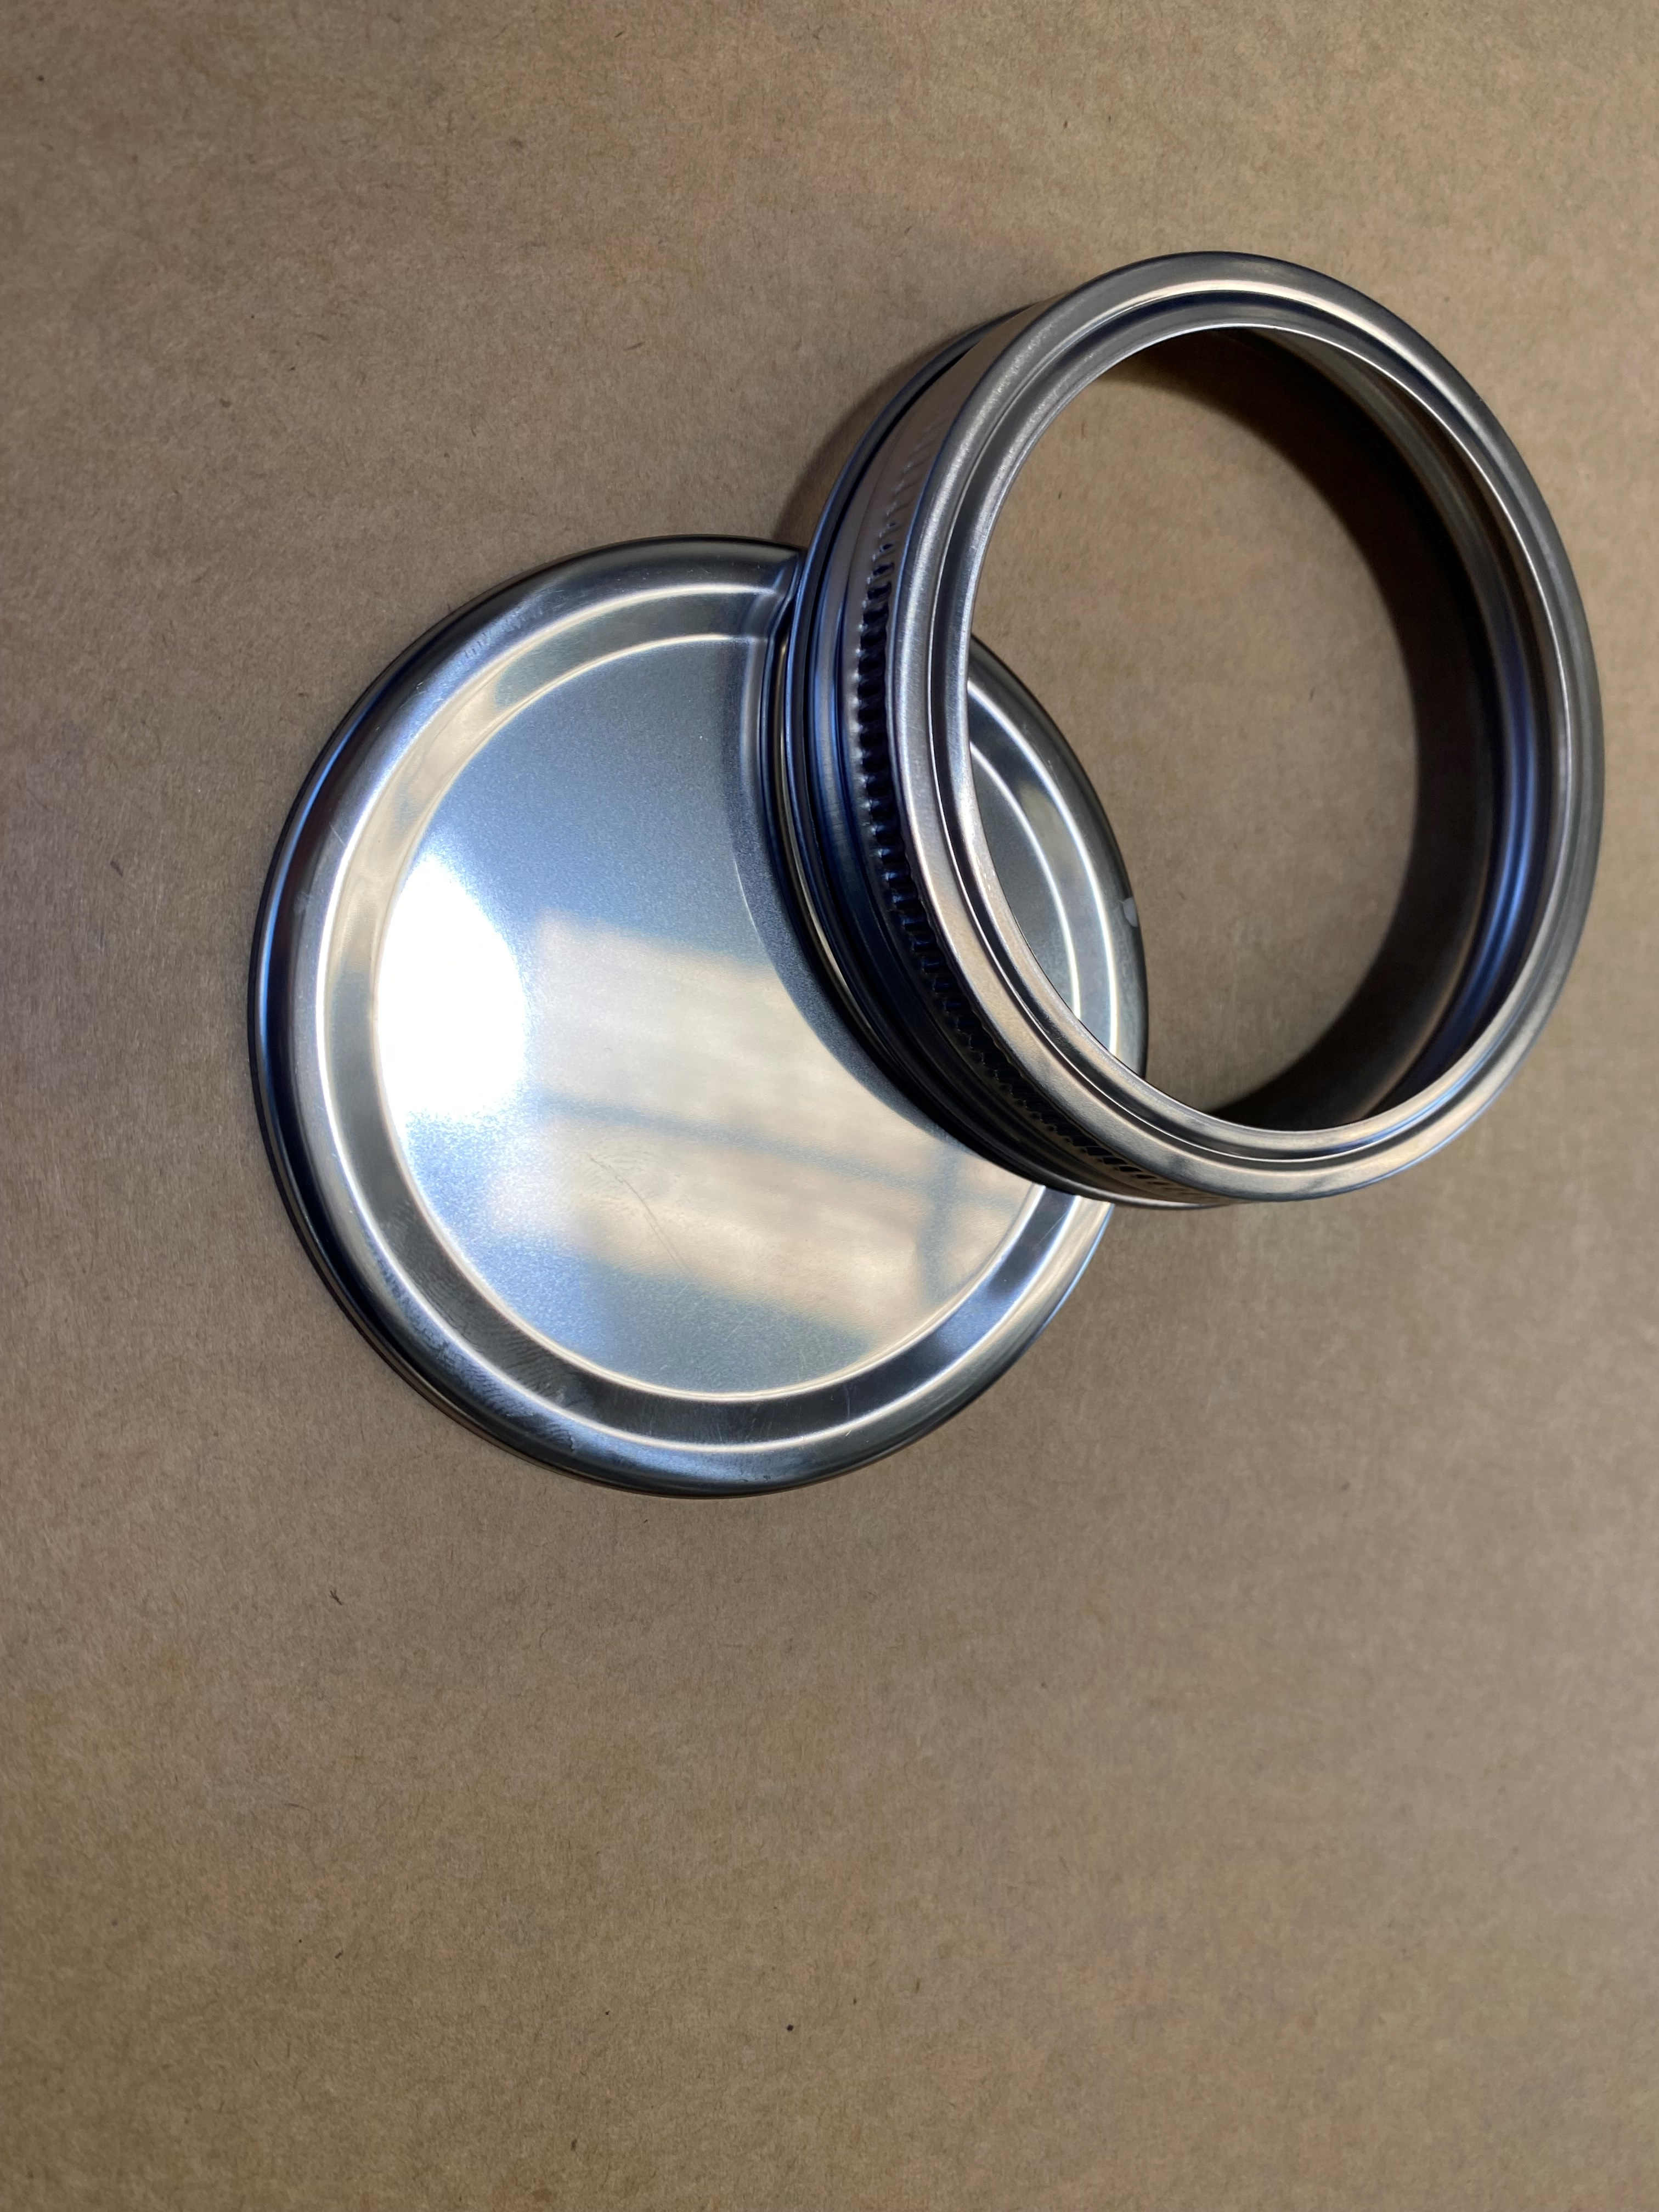 Stainless Steel Two-Piece Preserving Lid (band and seal)